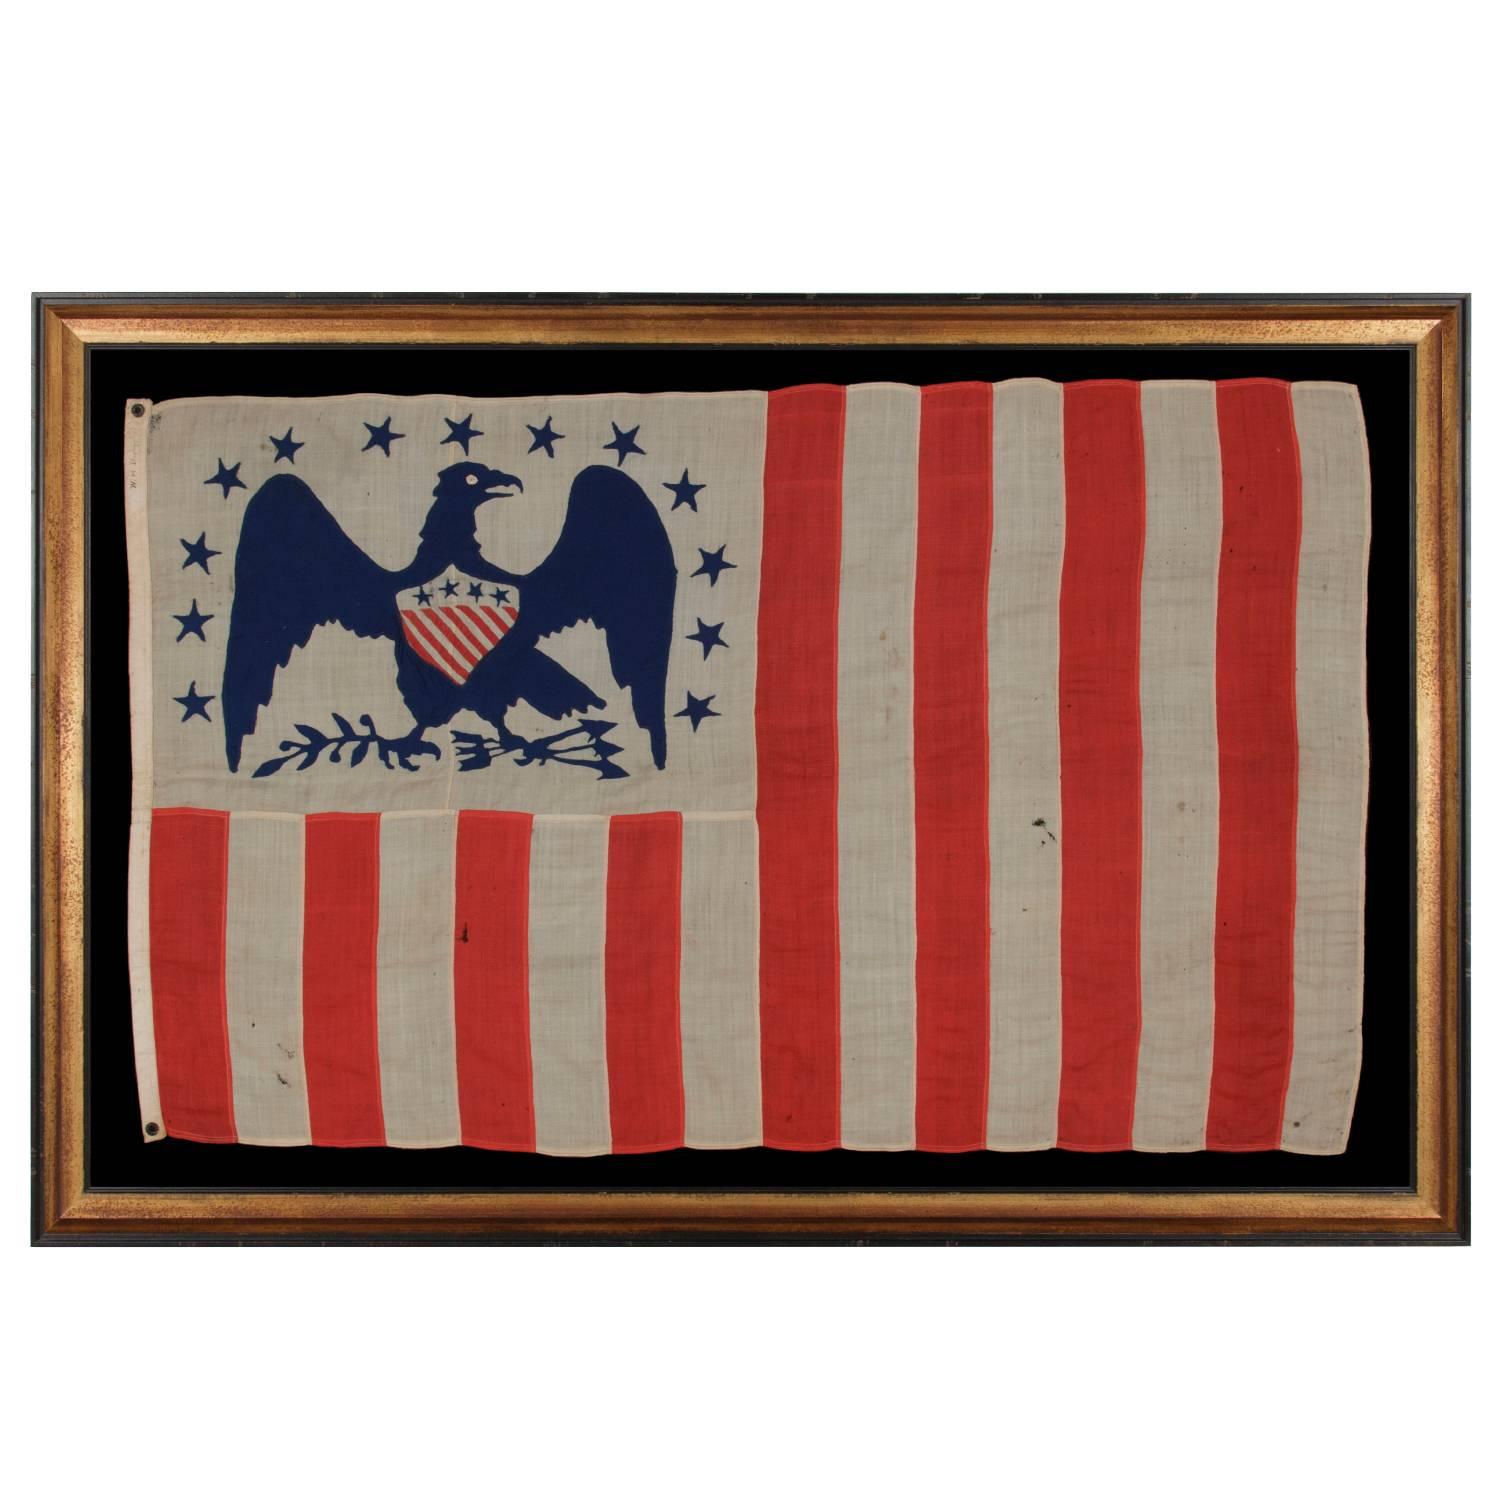 American Revenue Cutter Service Ensign (Flag) Belonging to Cpt. William Bagley